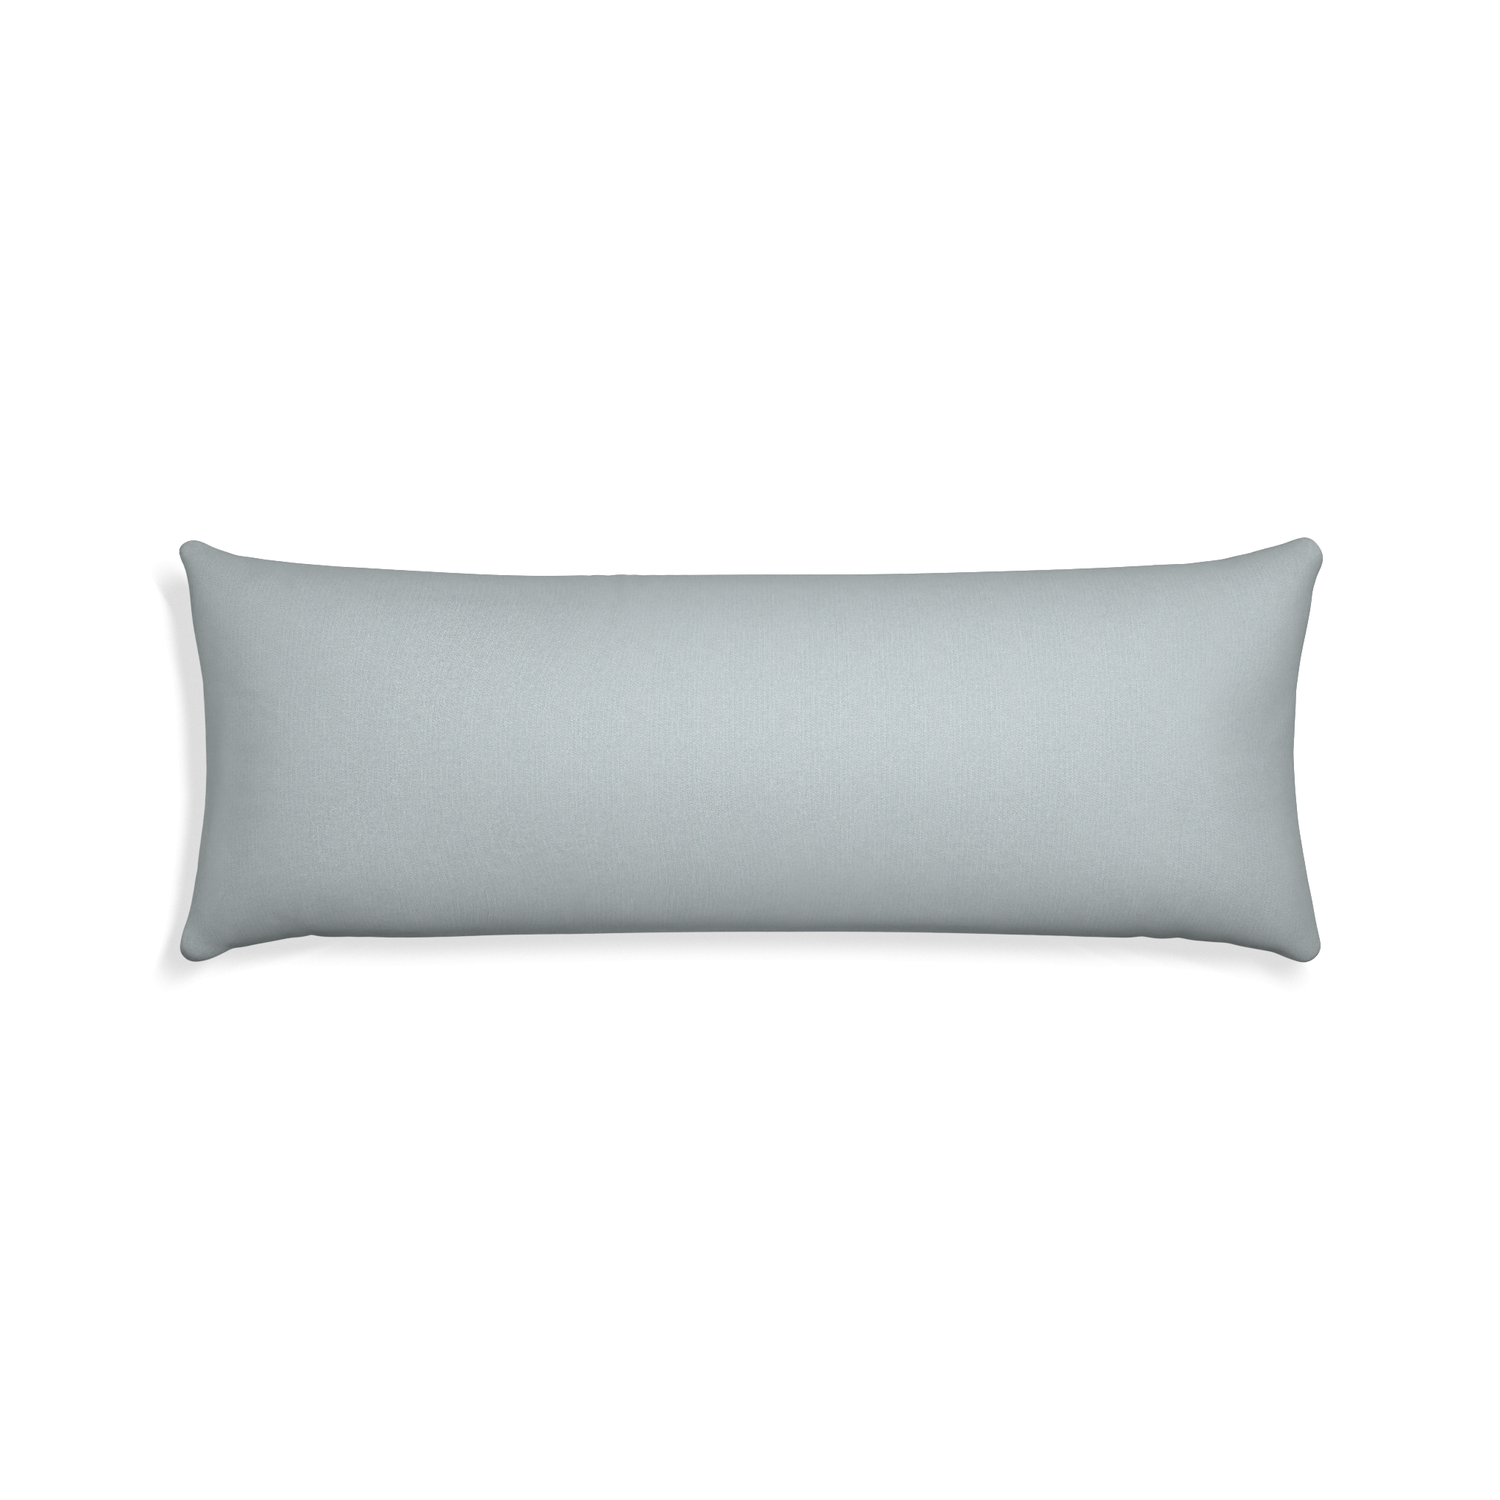 Xl-lumbar sea custom grey bluepillow with none on white background